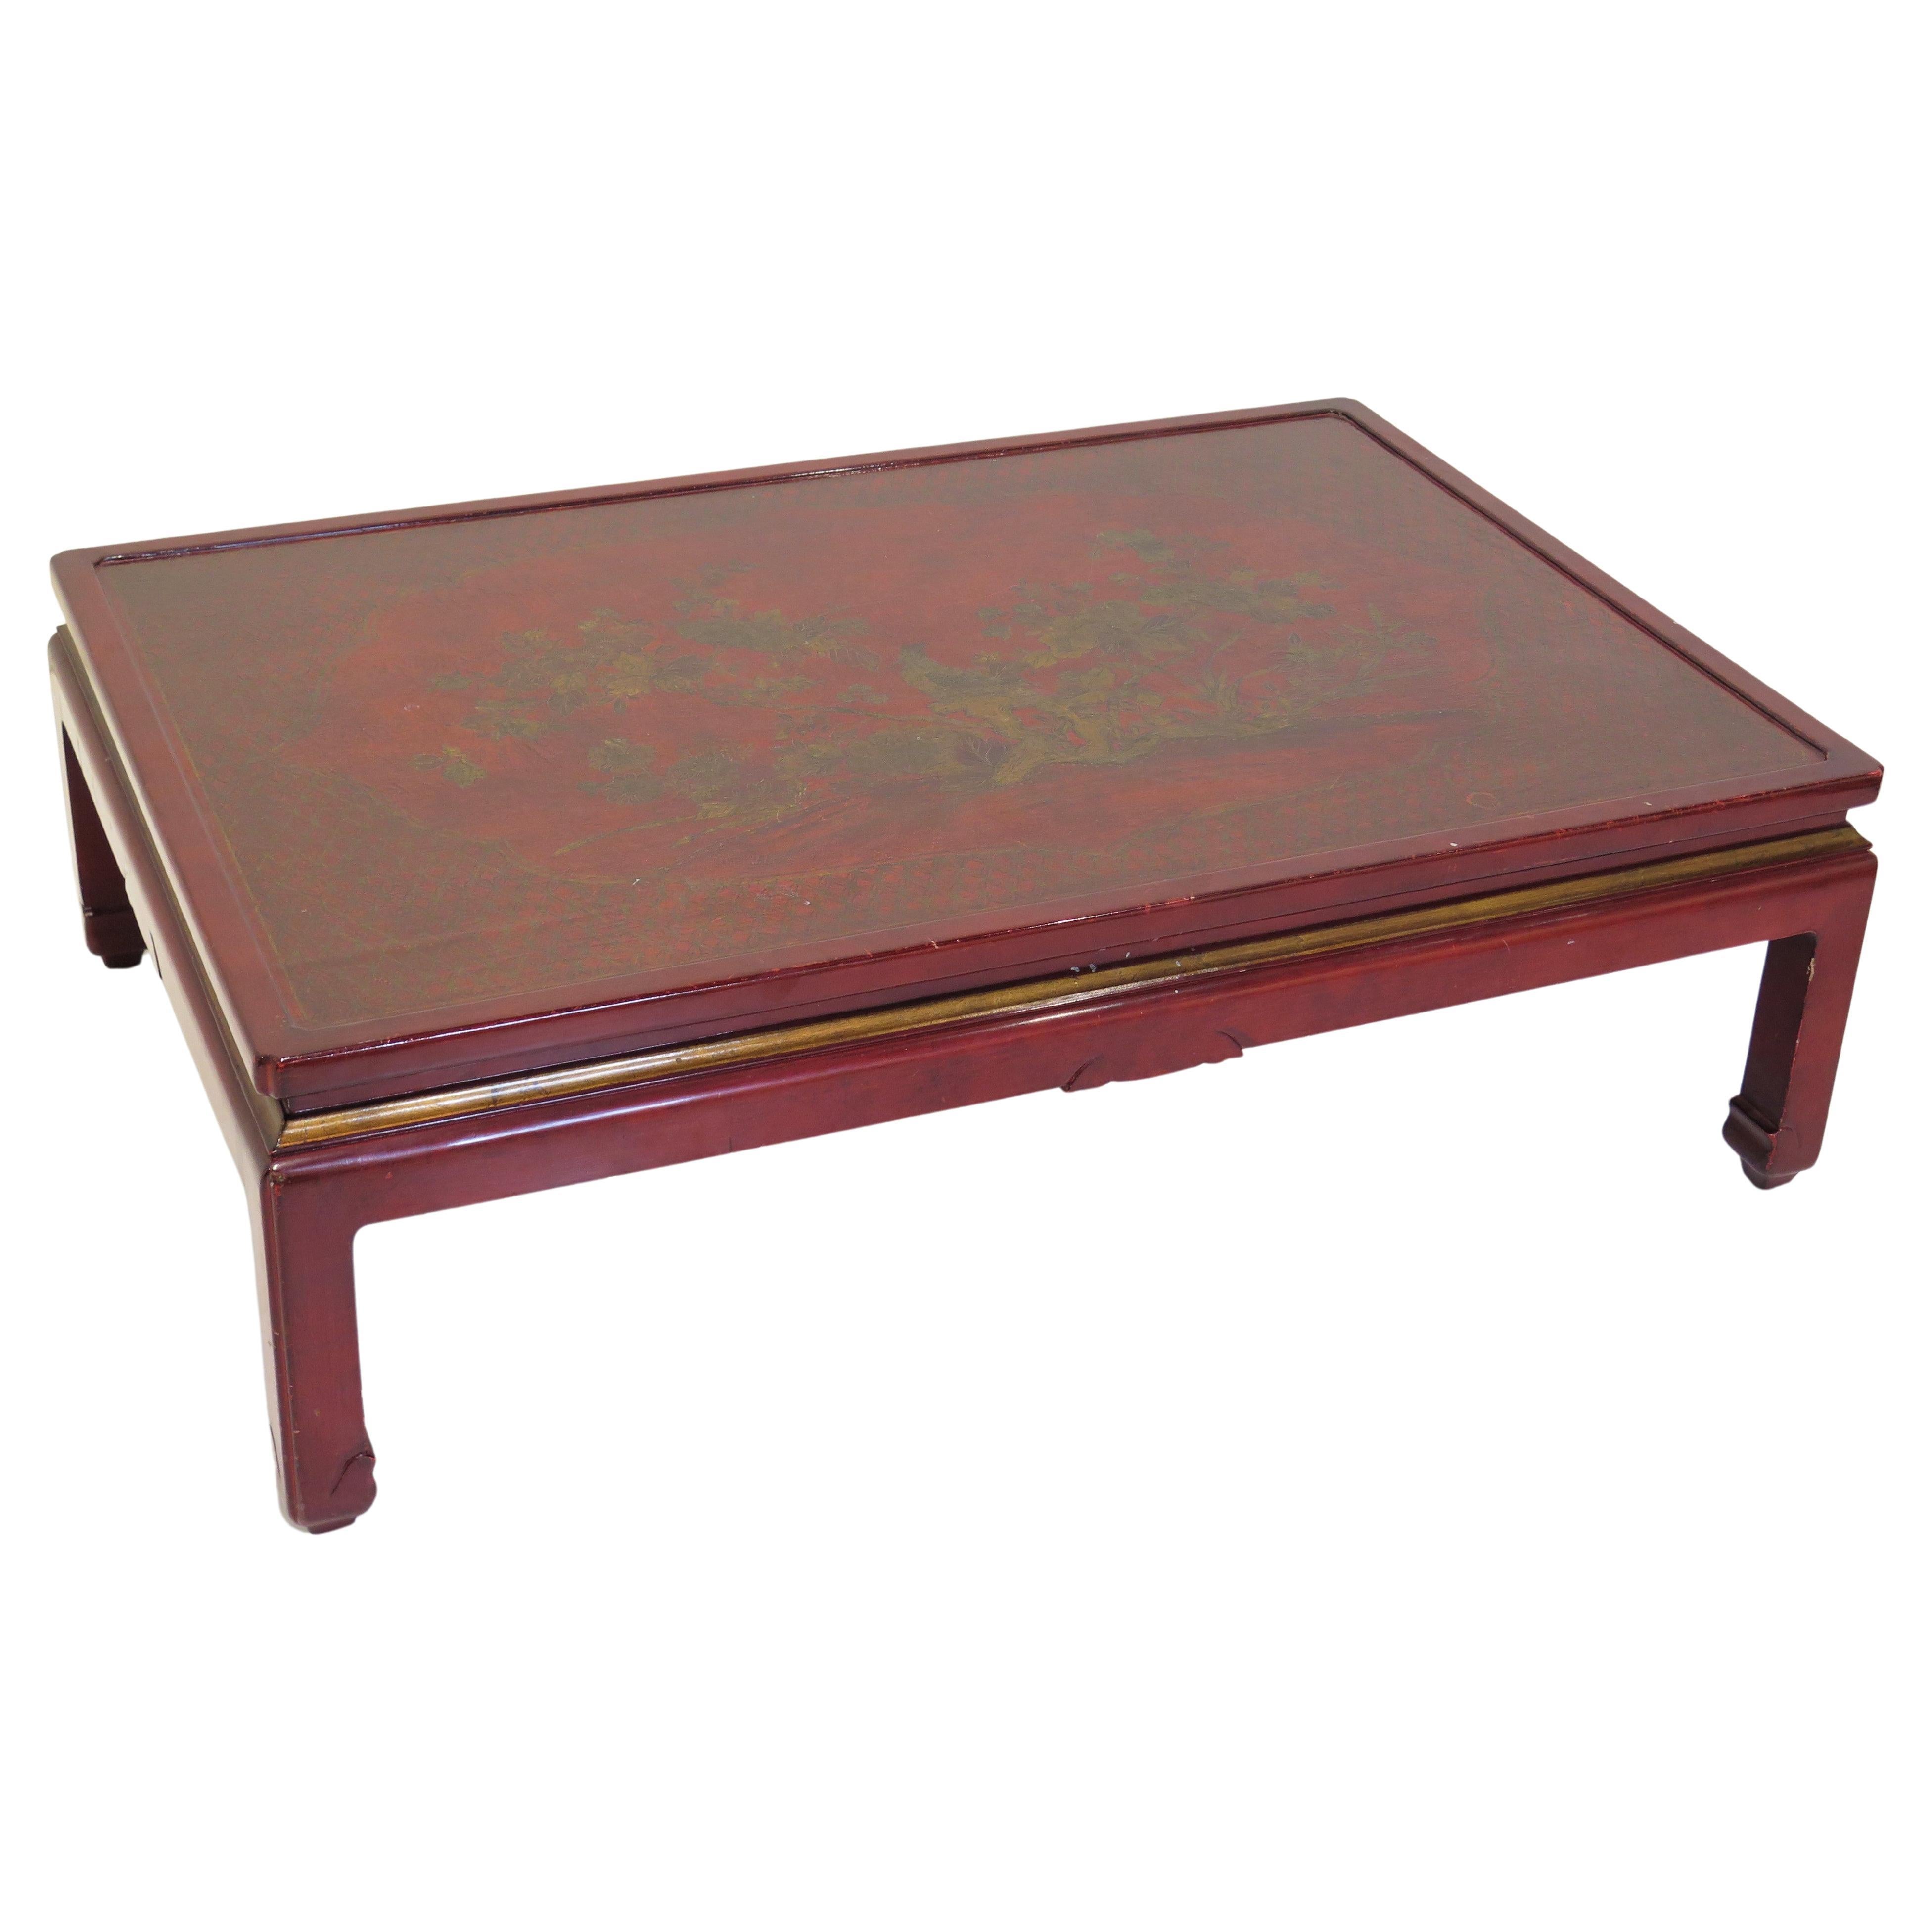 Red Lacquerware Cocktail Table by Atelier Midavaine, Paris For Sale